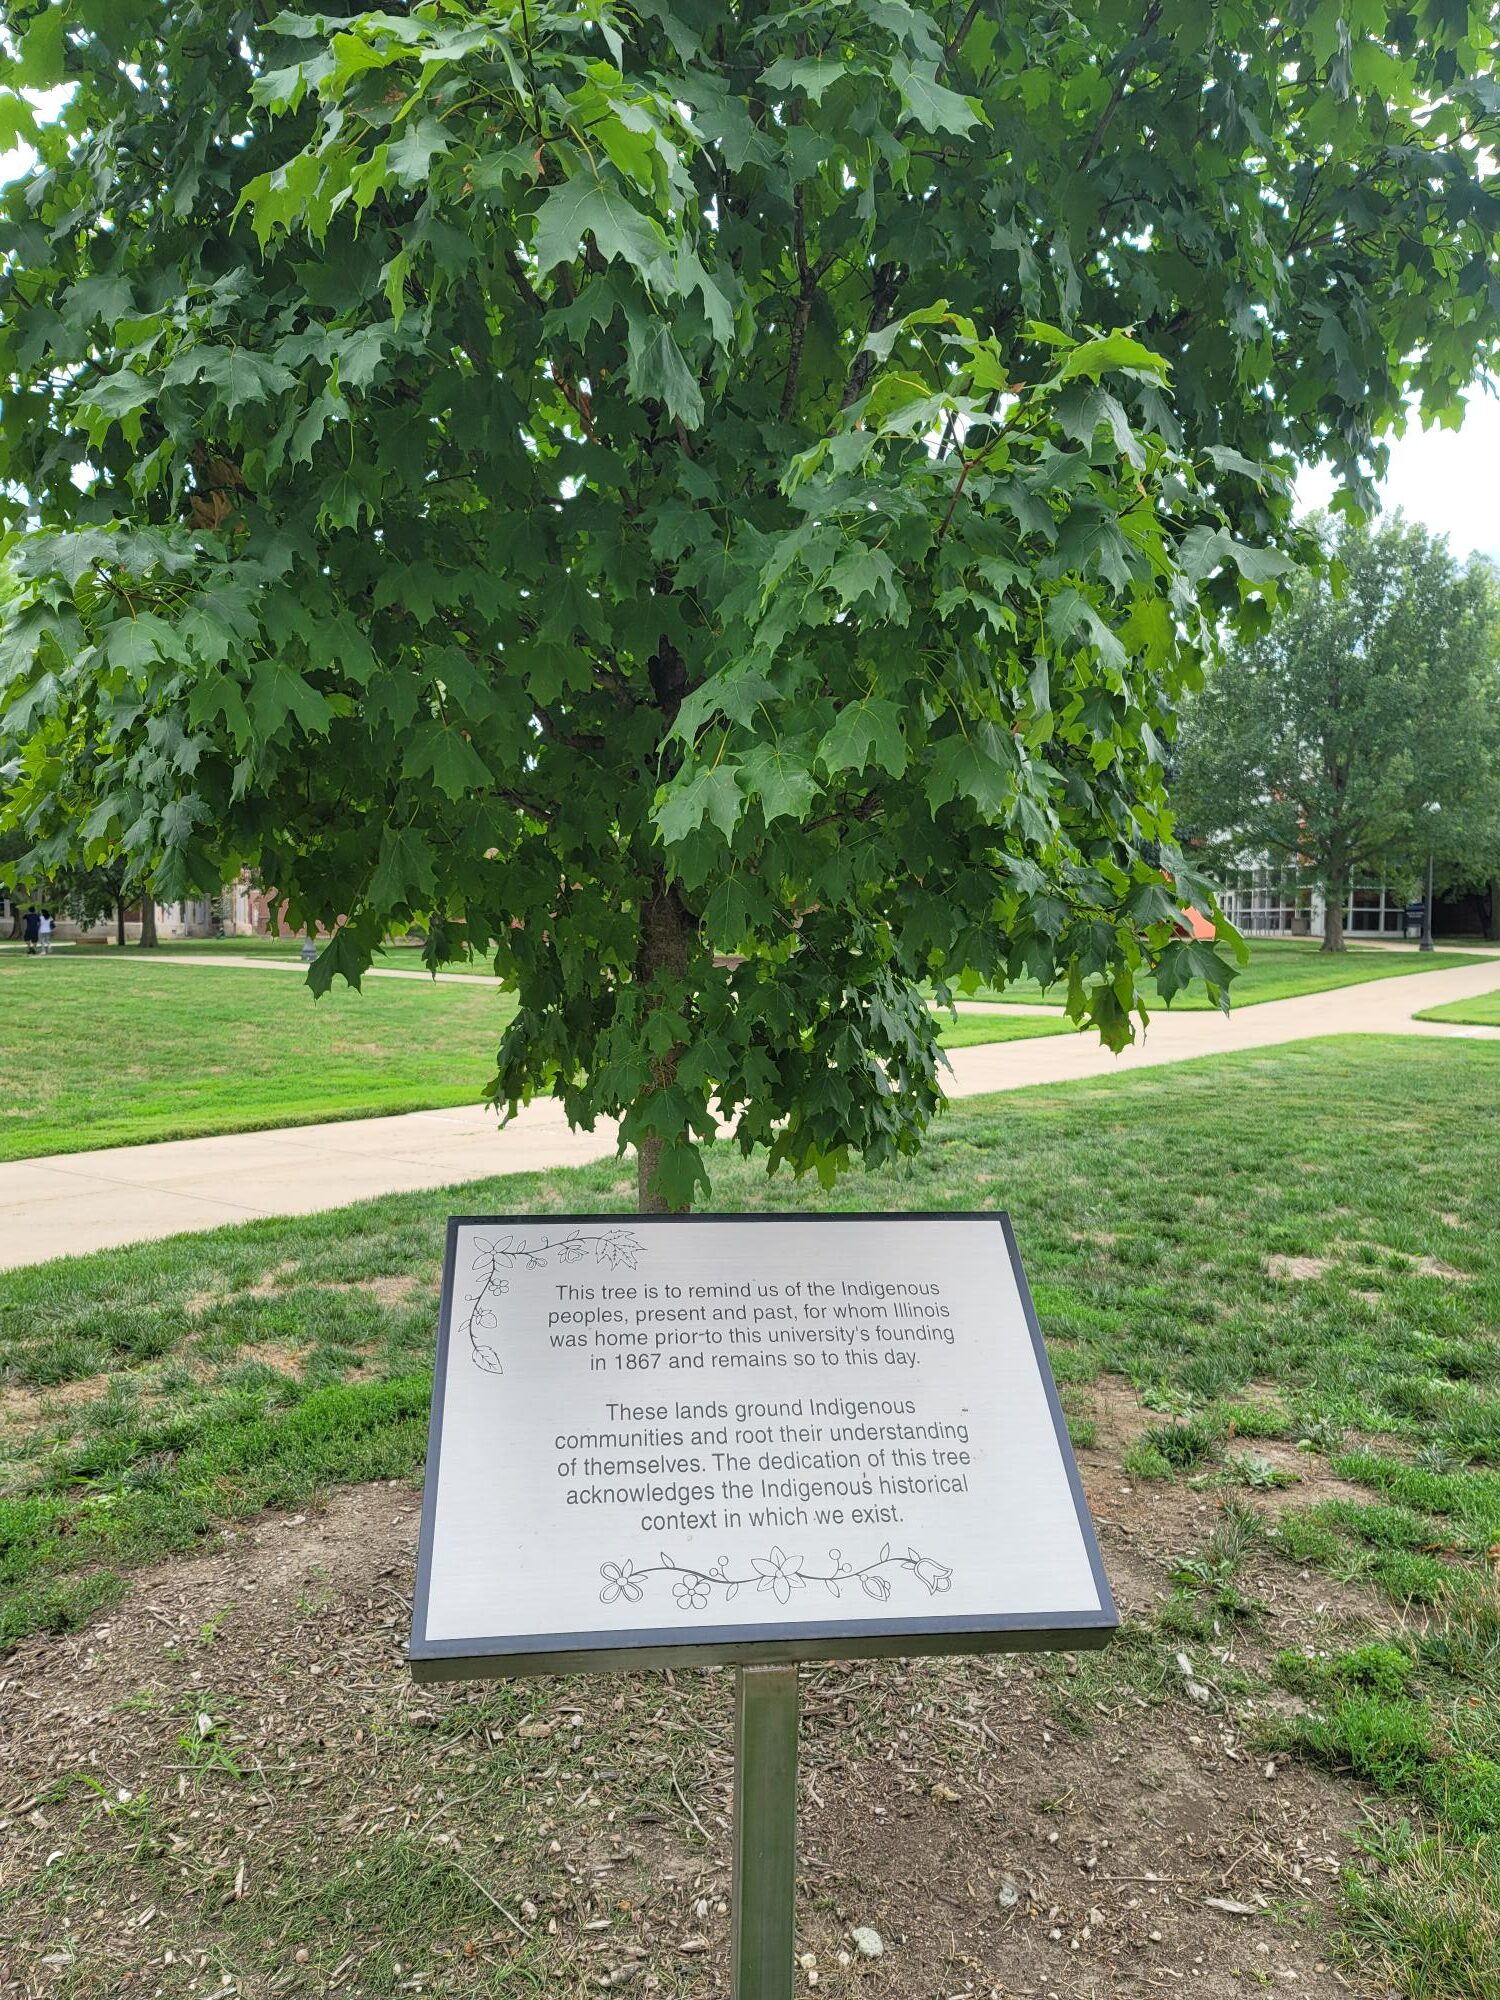 Maple tree planted in 2018 to remind us of the Indigenous peoples, present and past, for whom Illinois was home prior to this university's founding.